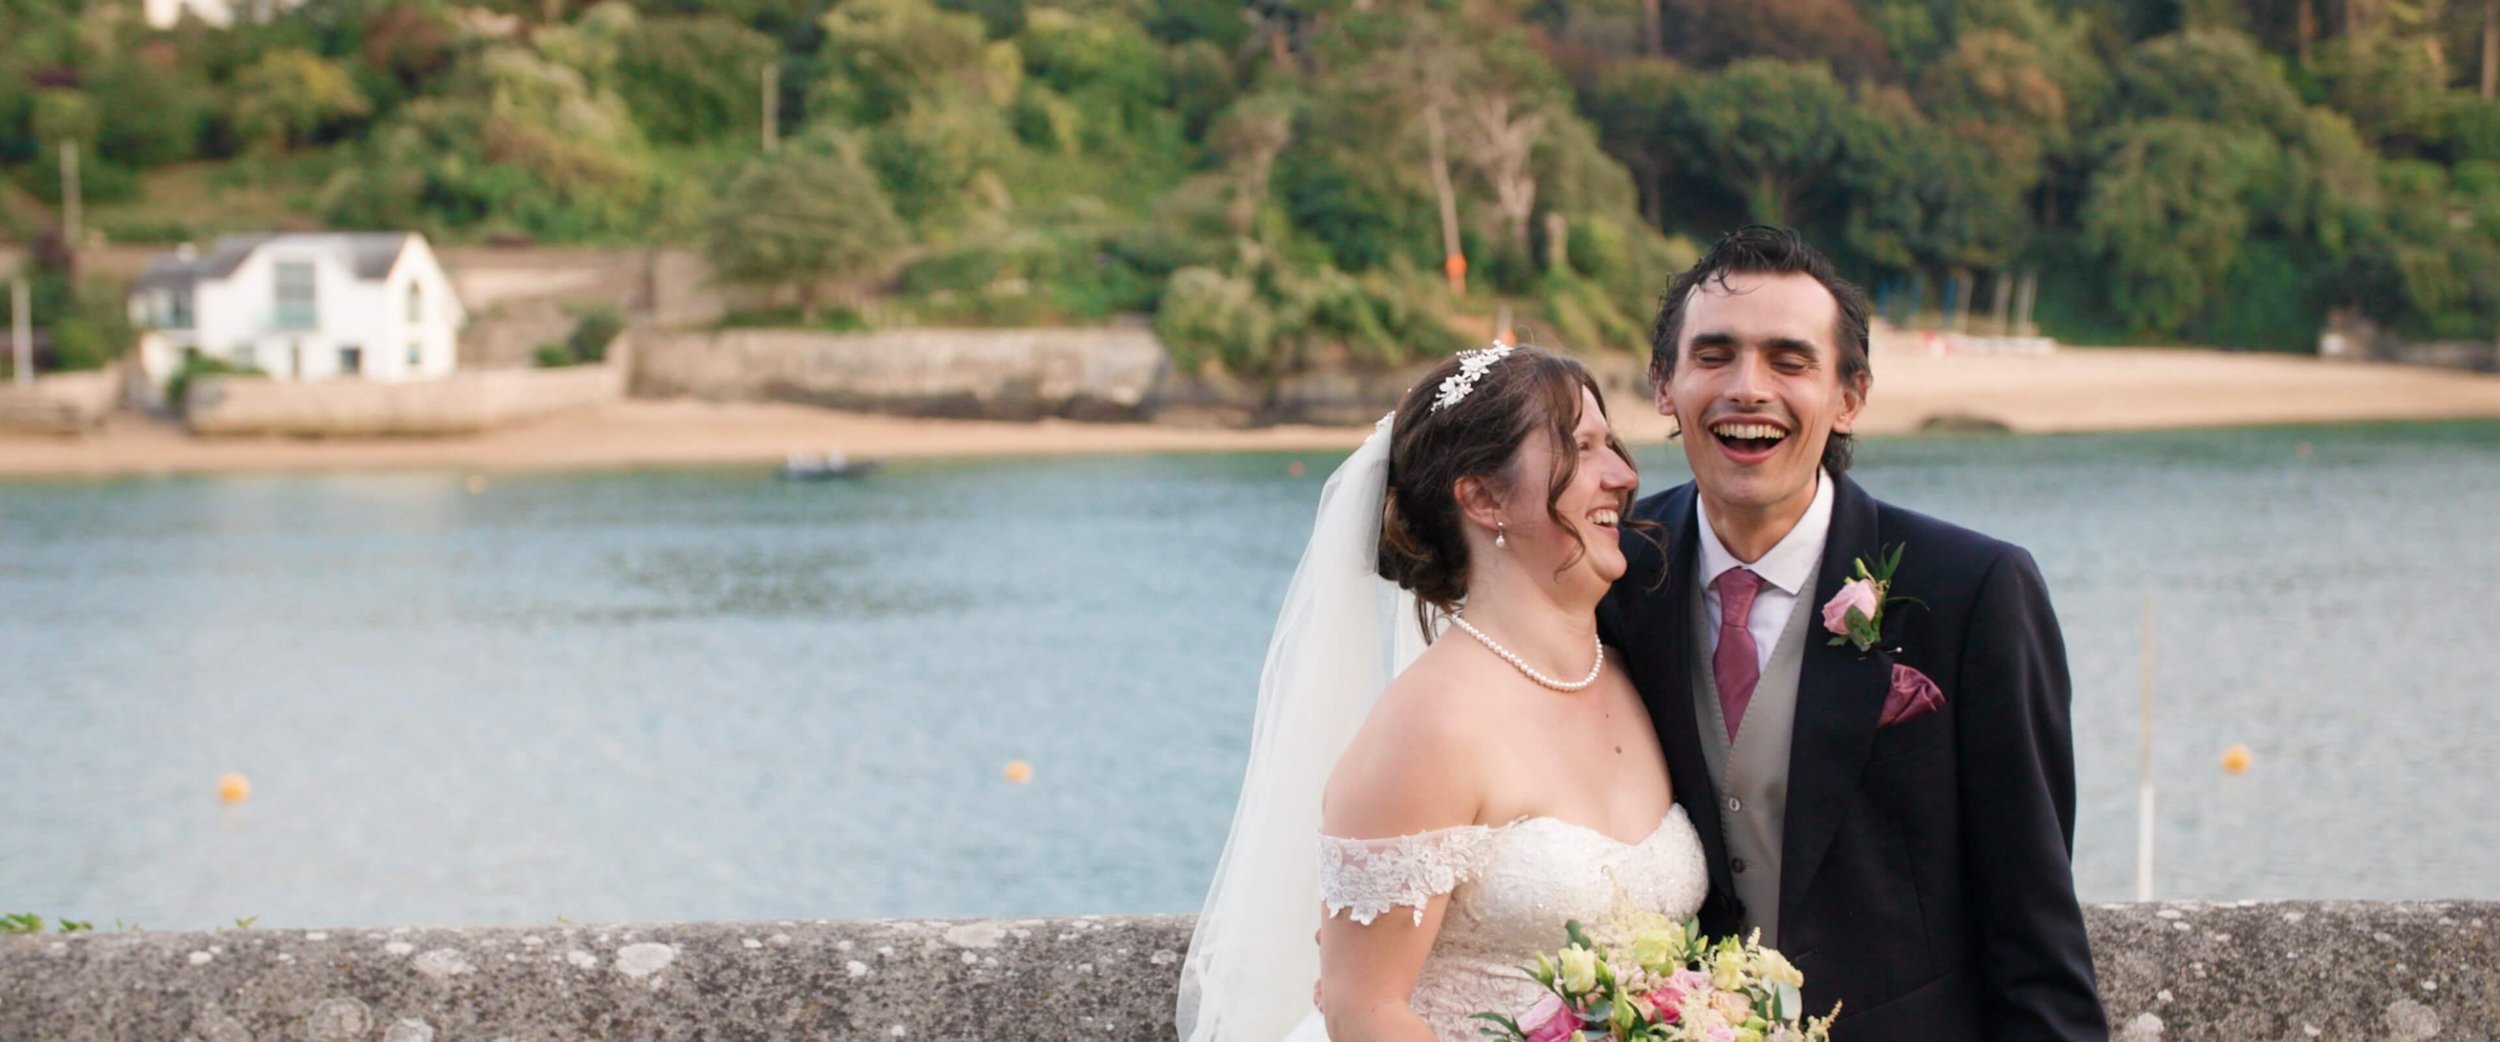 Amy&amp; Stephen laugh fiercly together as they stand in front of the Salcombe Estuary in their wedding outfits